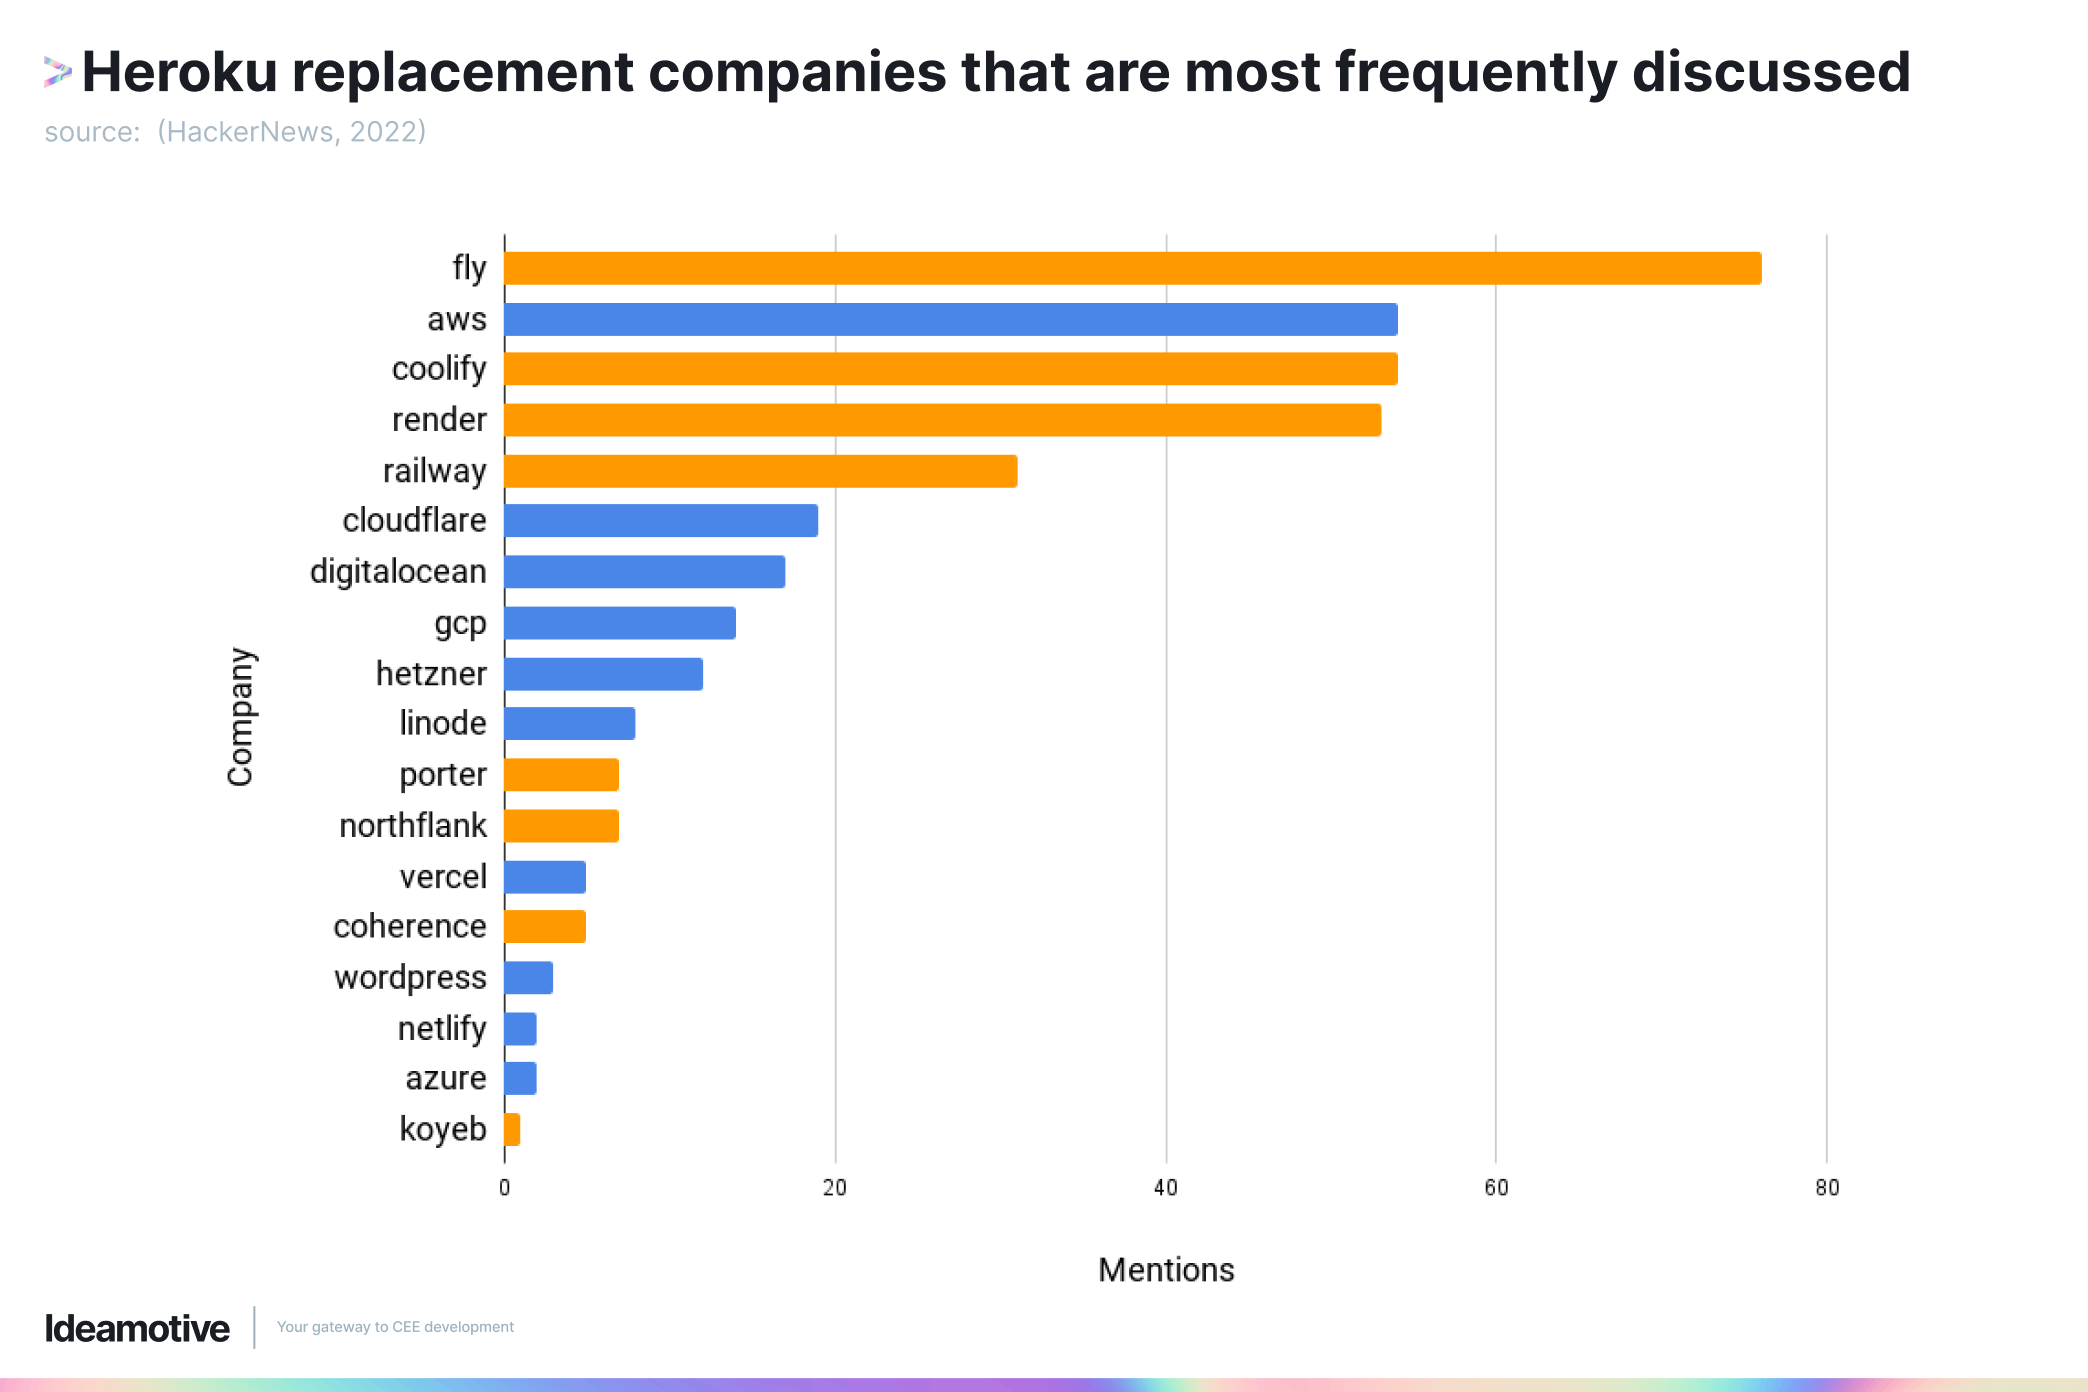 Heroku replacement companies that are most frequently discussed